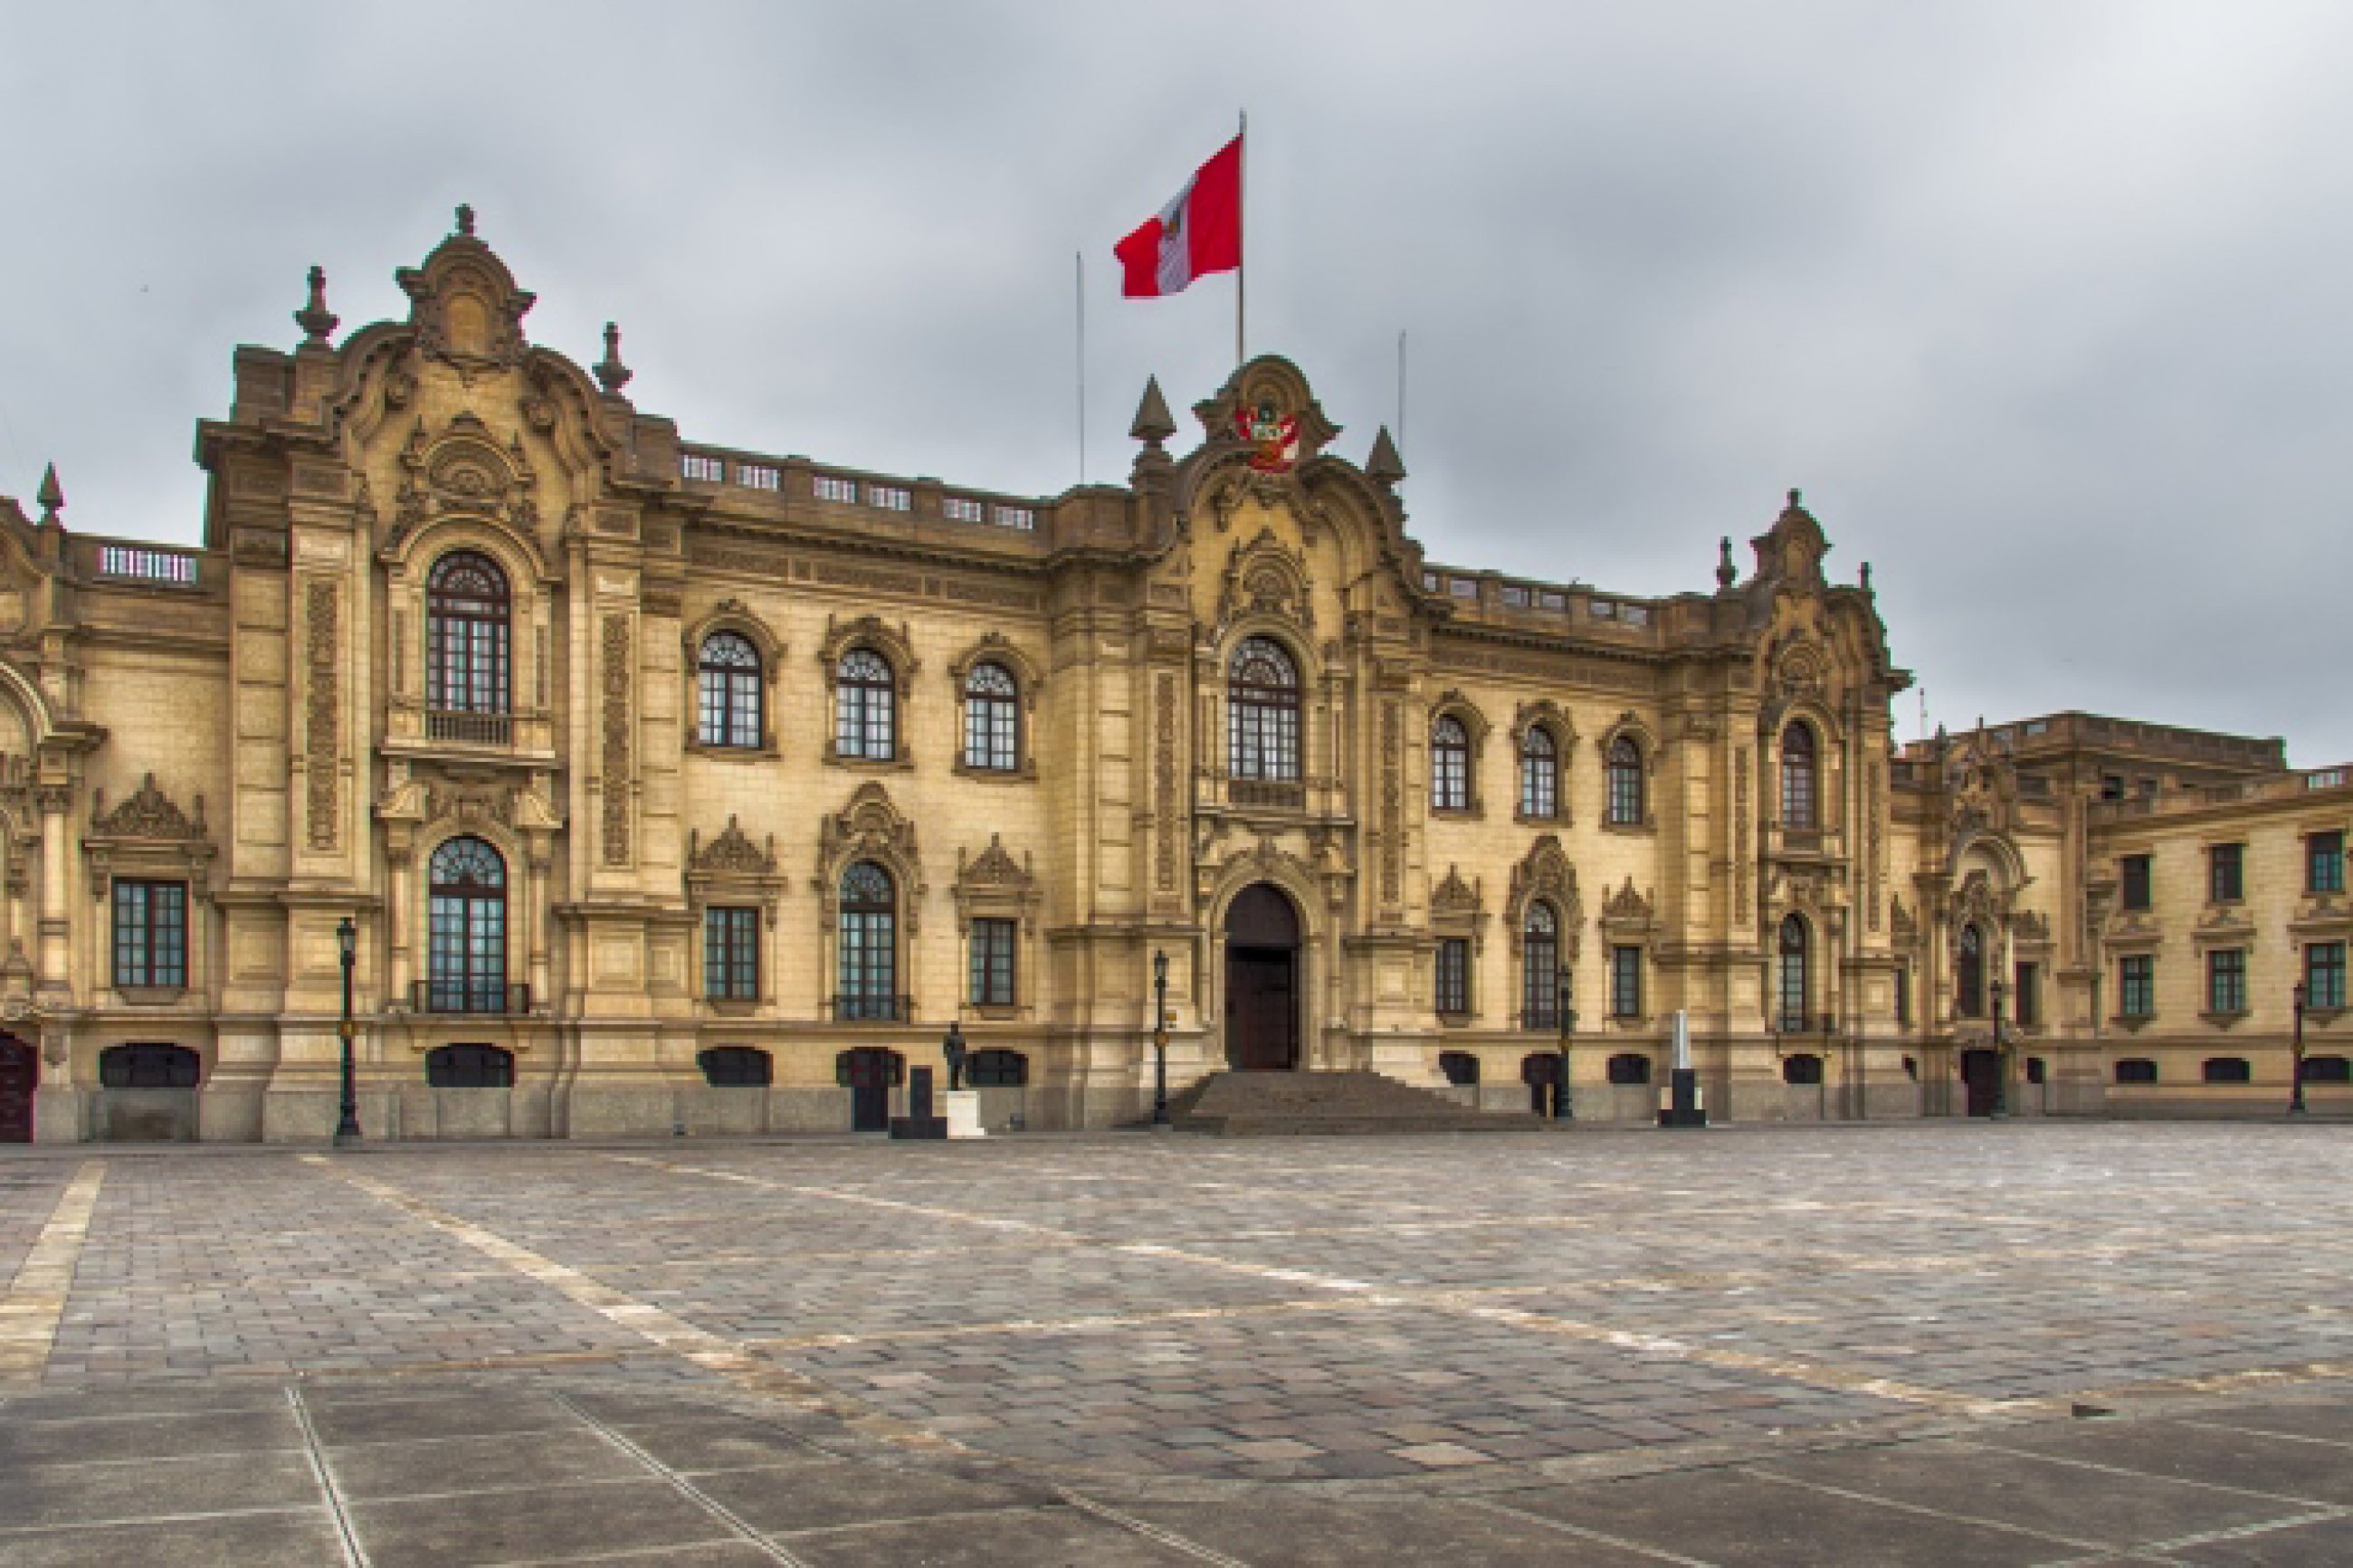 https://bubo.sk/uploads/galleries/7430/lima-peru-government-palace-residence-of-the-president-known-as-house-of-pizarro-in-the-historic-centre-of-lima-unesco-world-heritage-site.jpg